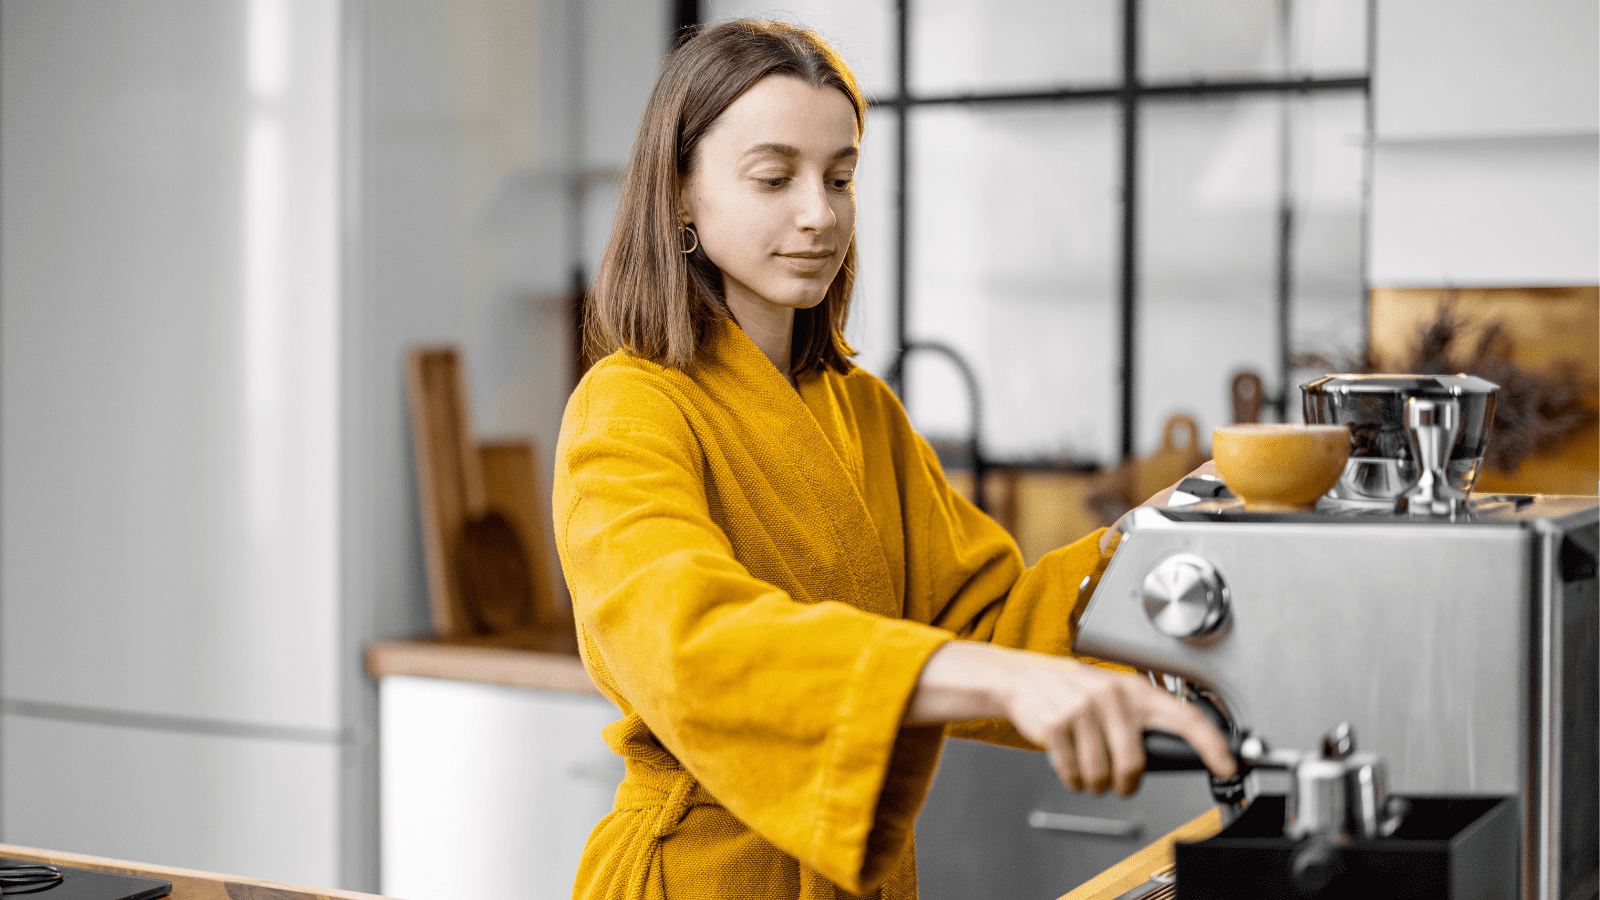 Woman Making Coffee in the Morning at Home